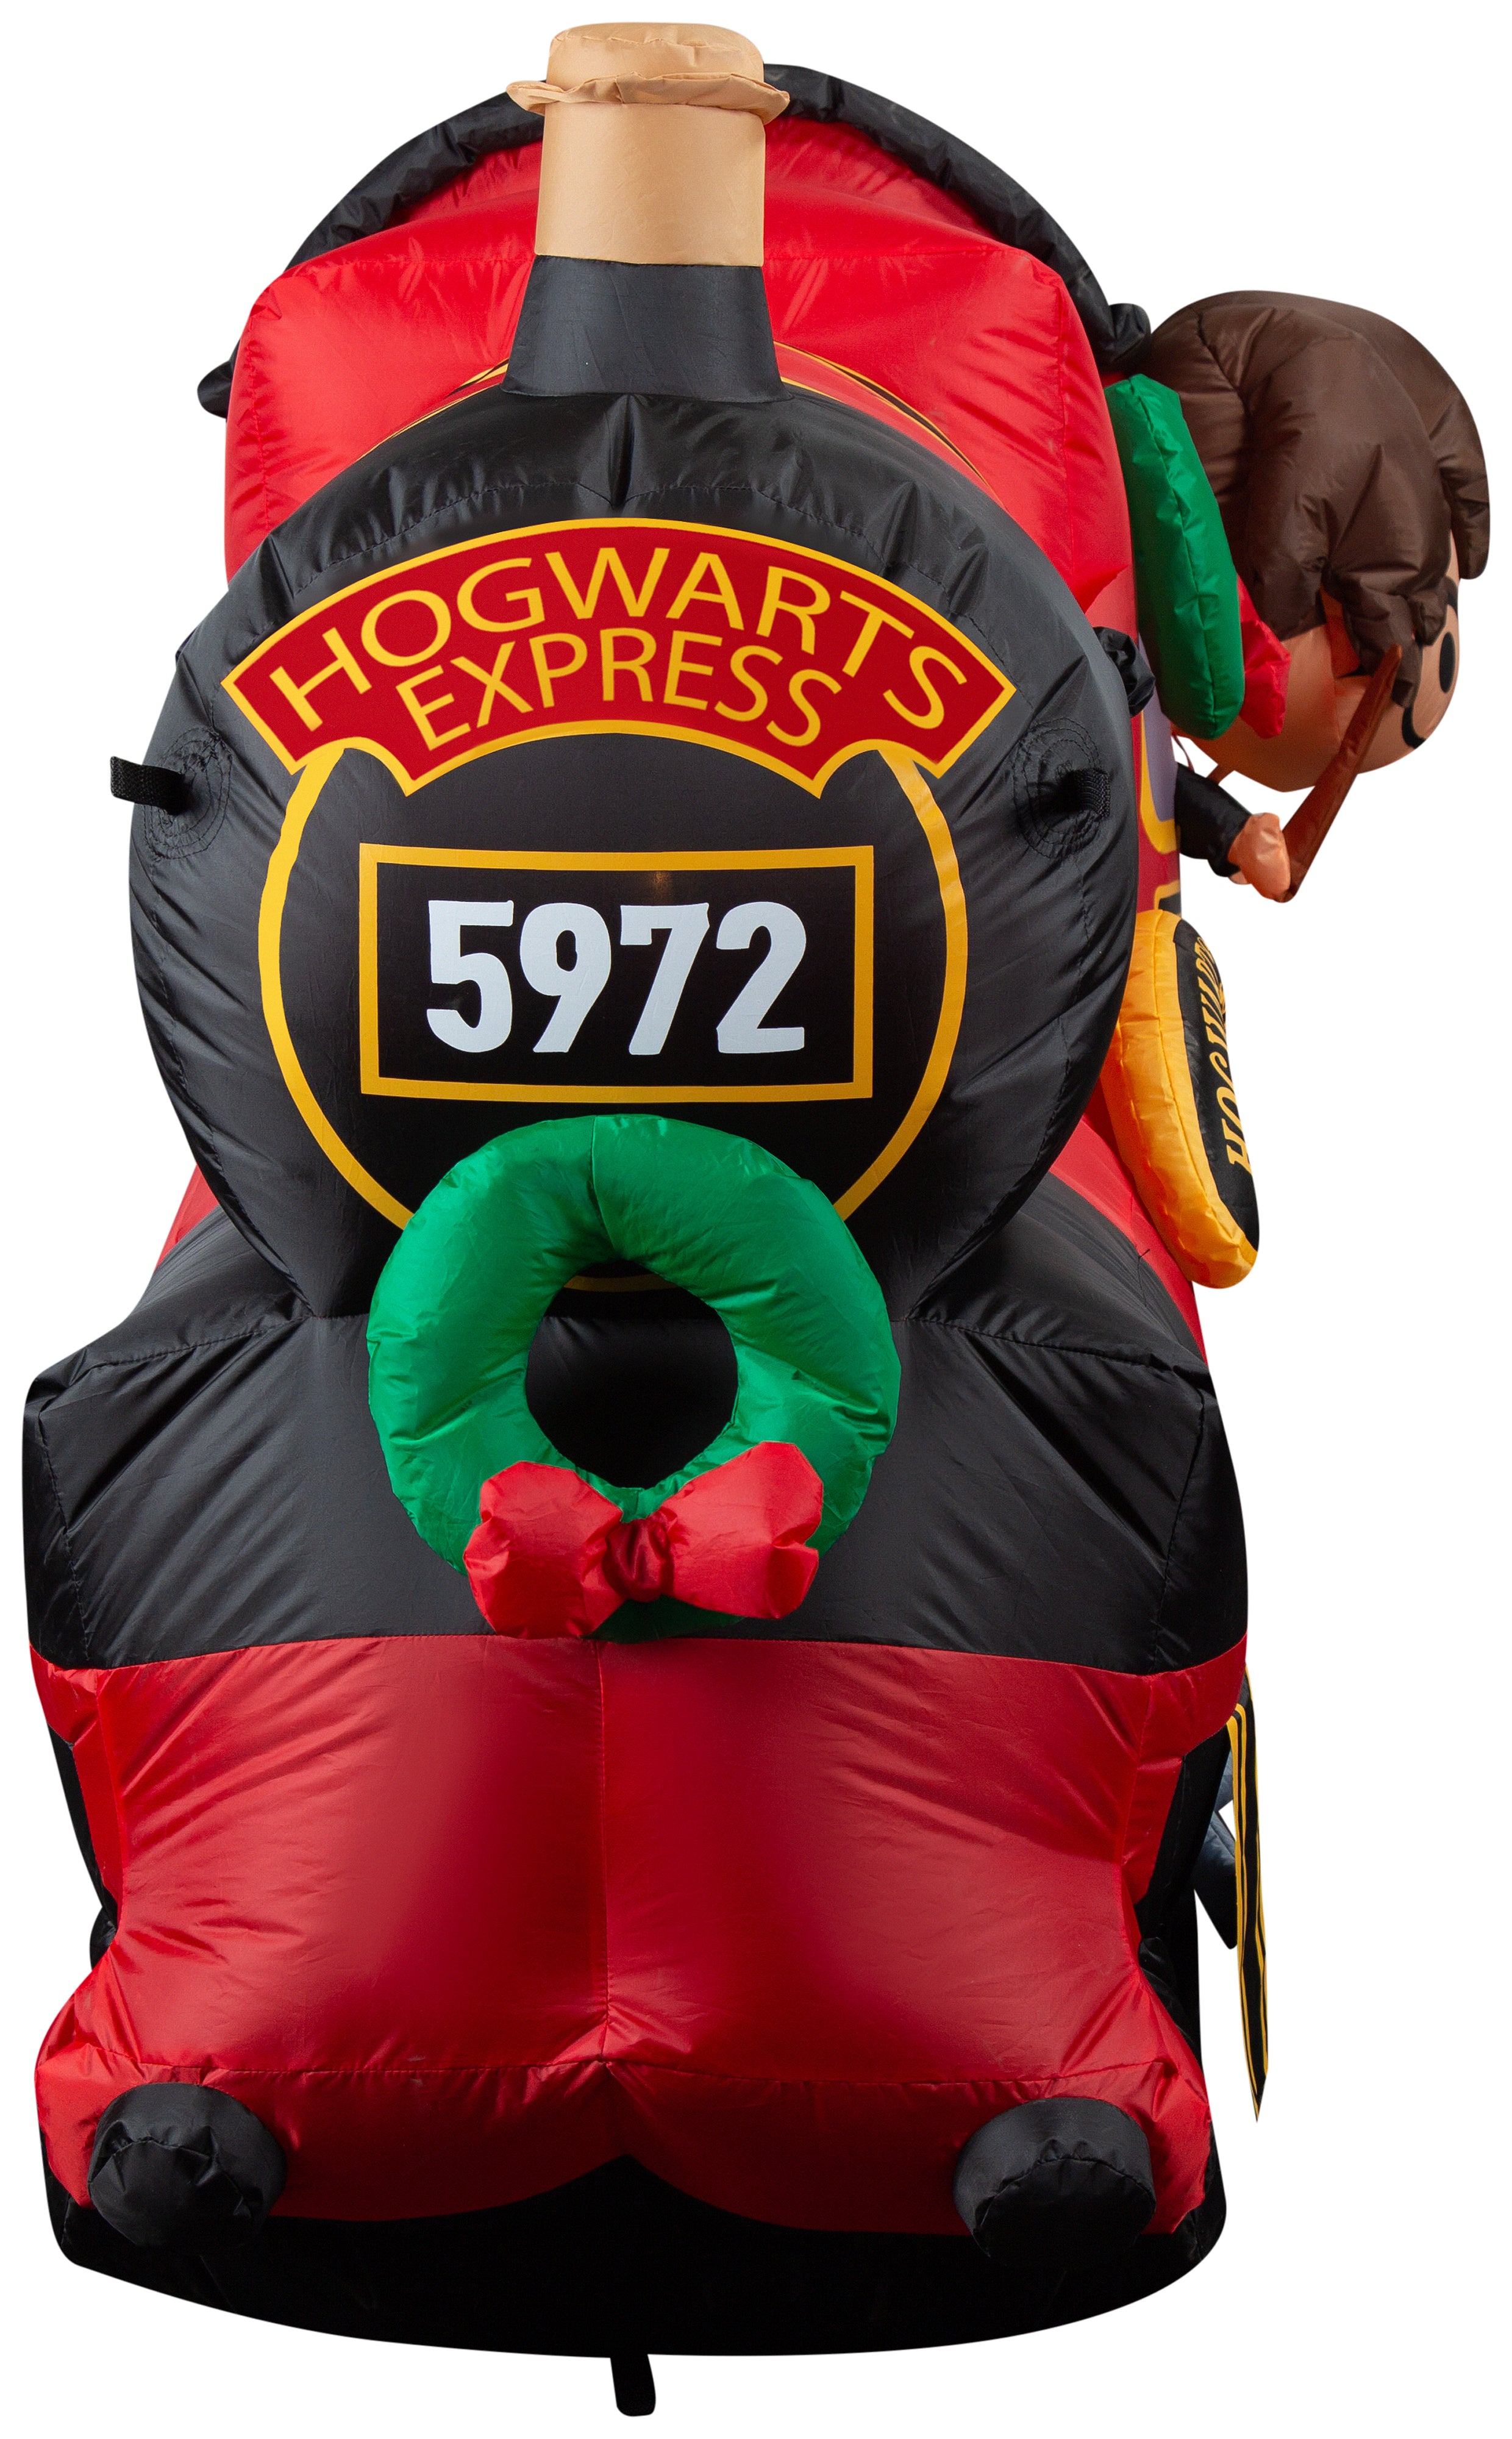 Gemmy Christmas Airblown Inflatable Hogwarts Express w/LEDs Scene WB, 4 ft Tall, Multi